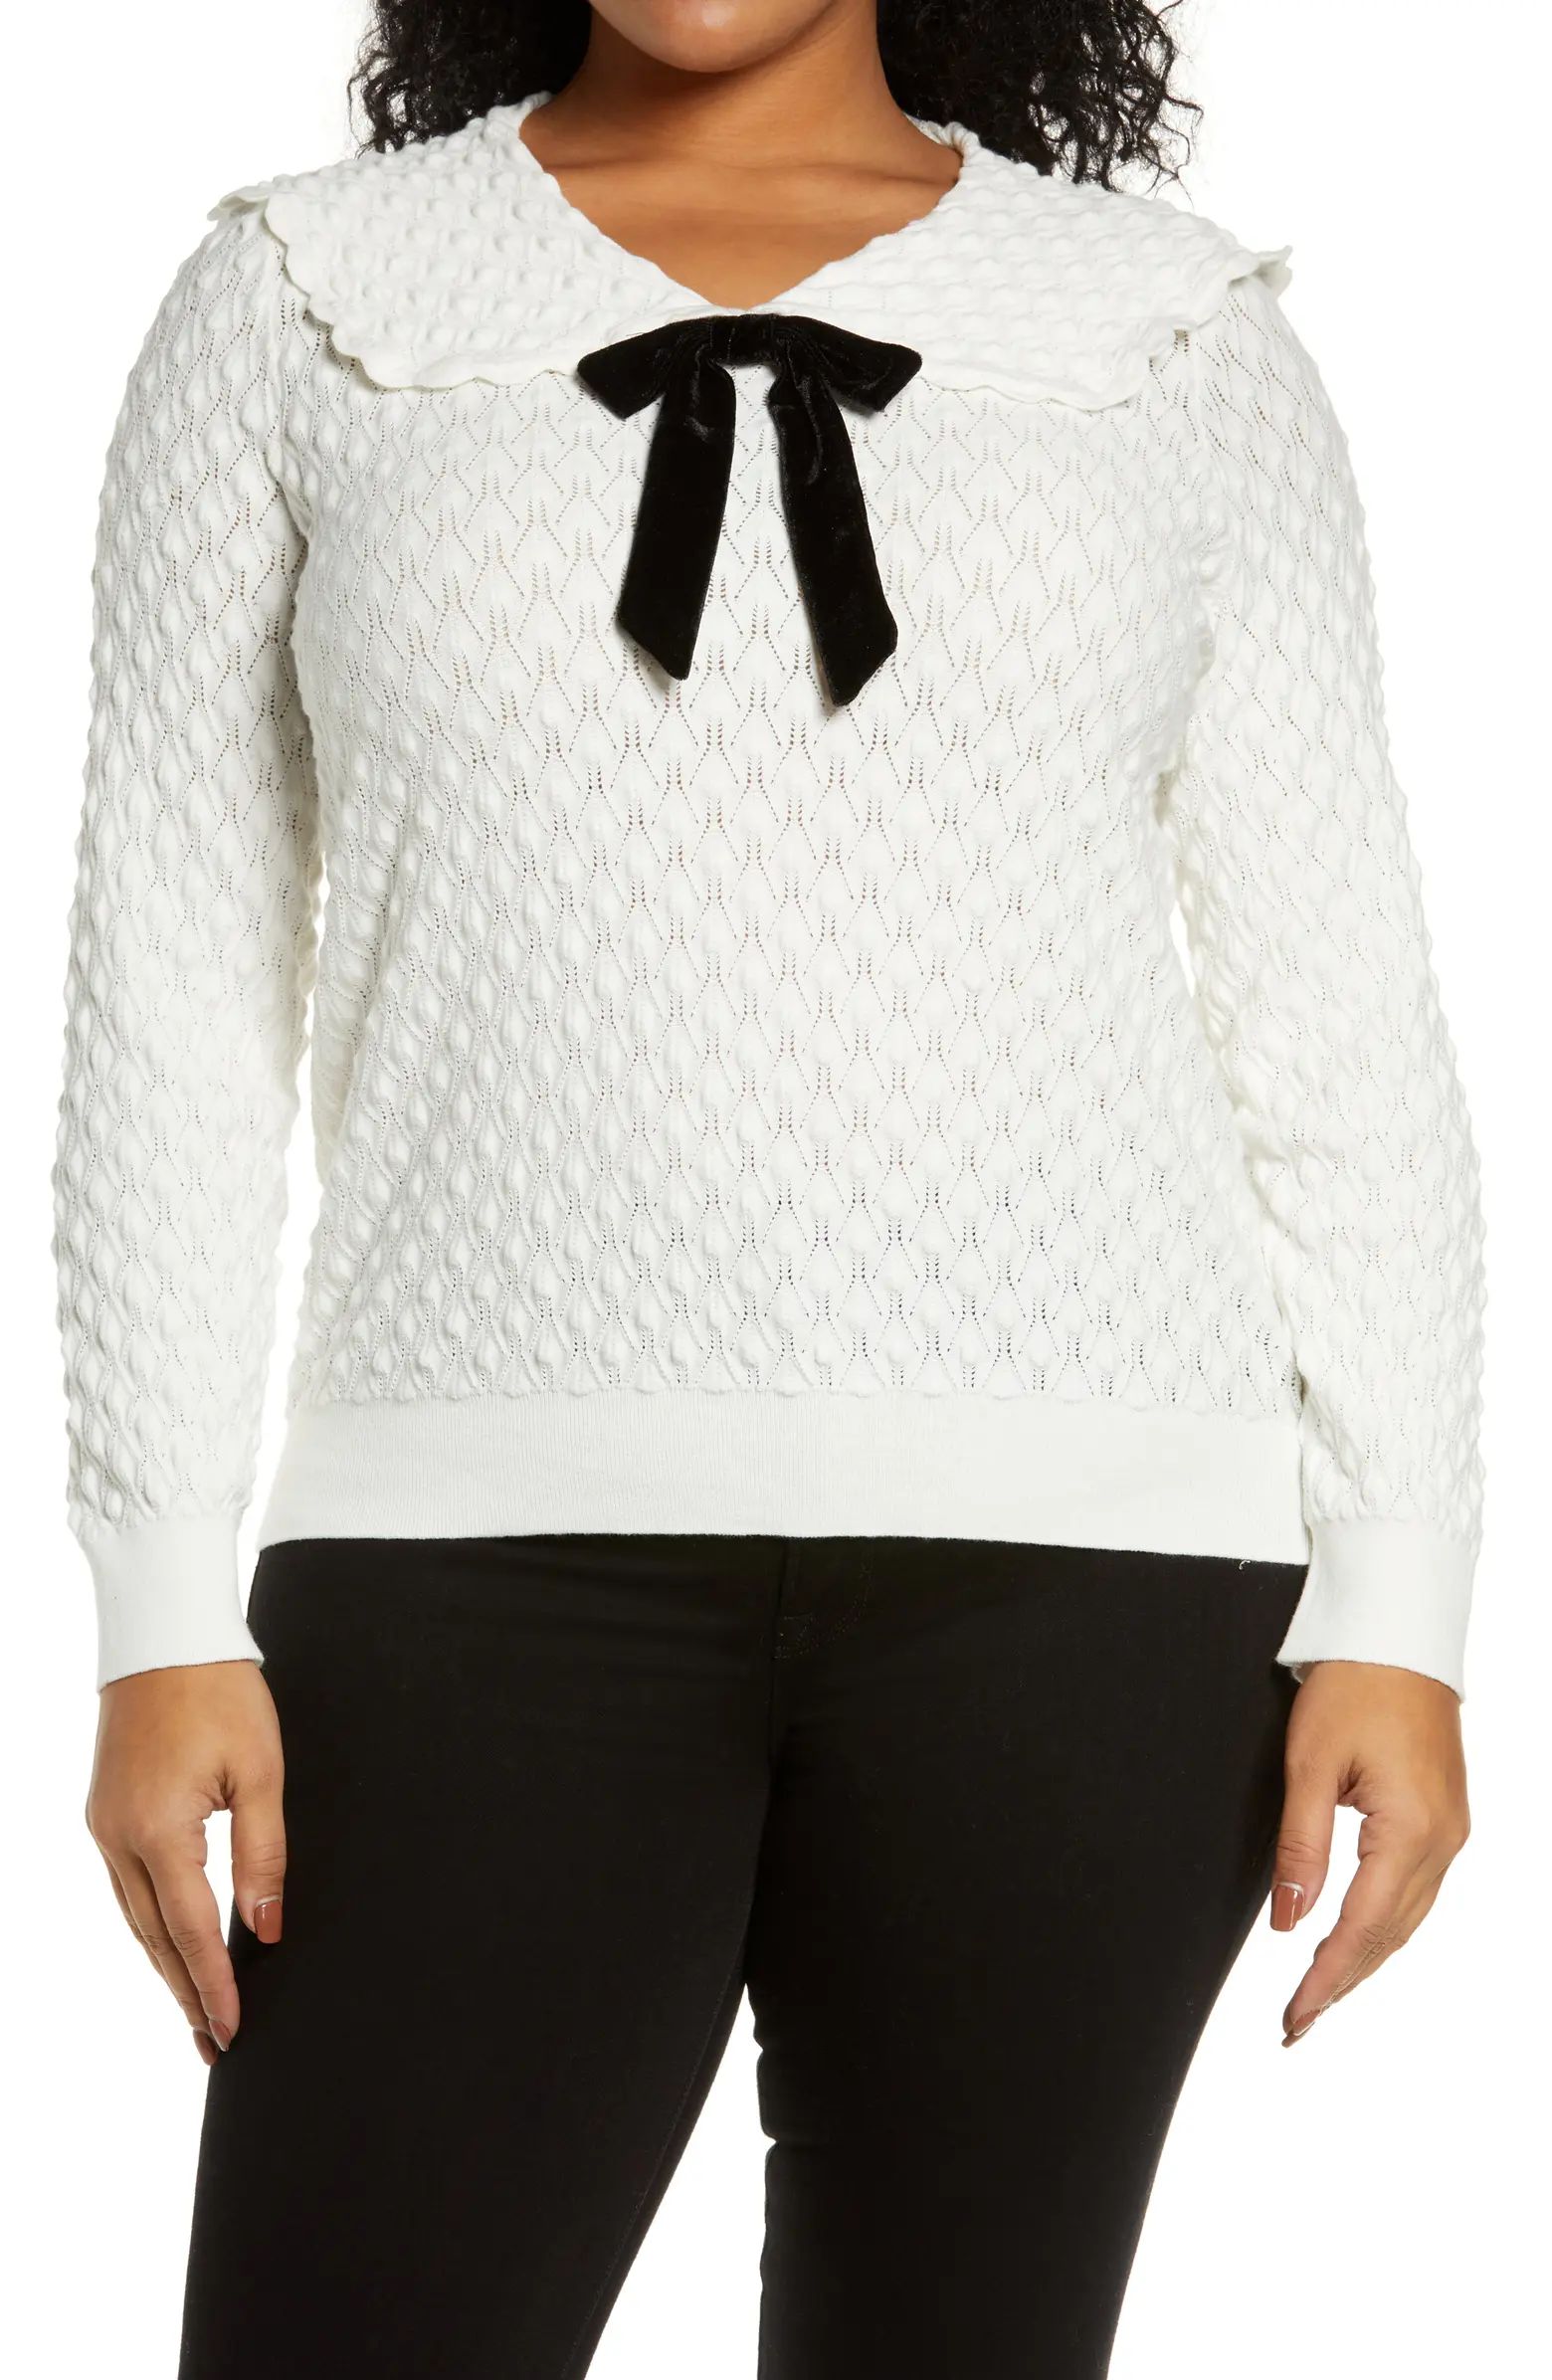 Pointelle Knit Collared Sweater with Velvet Bow | Nordstrom